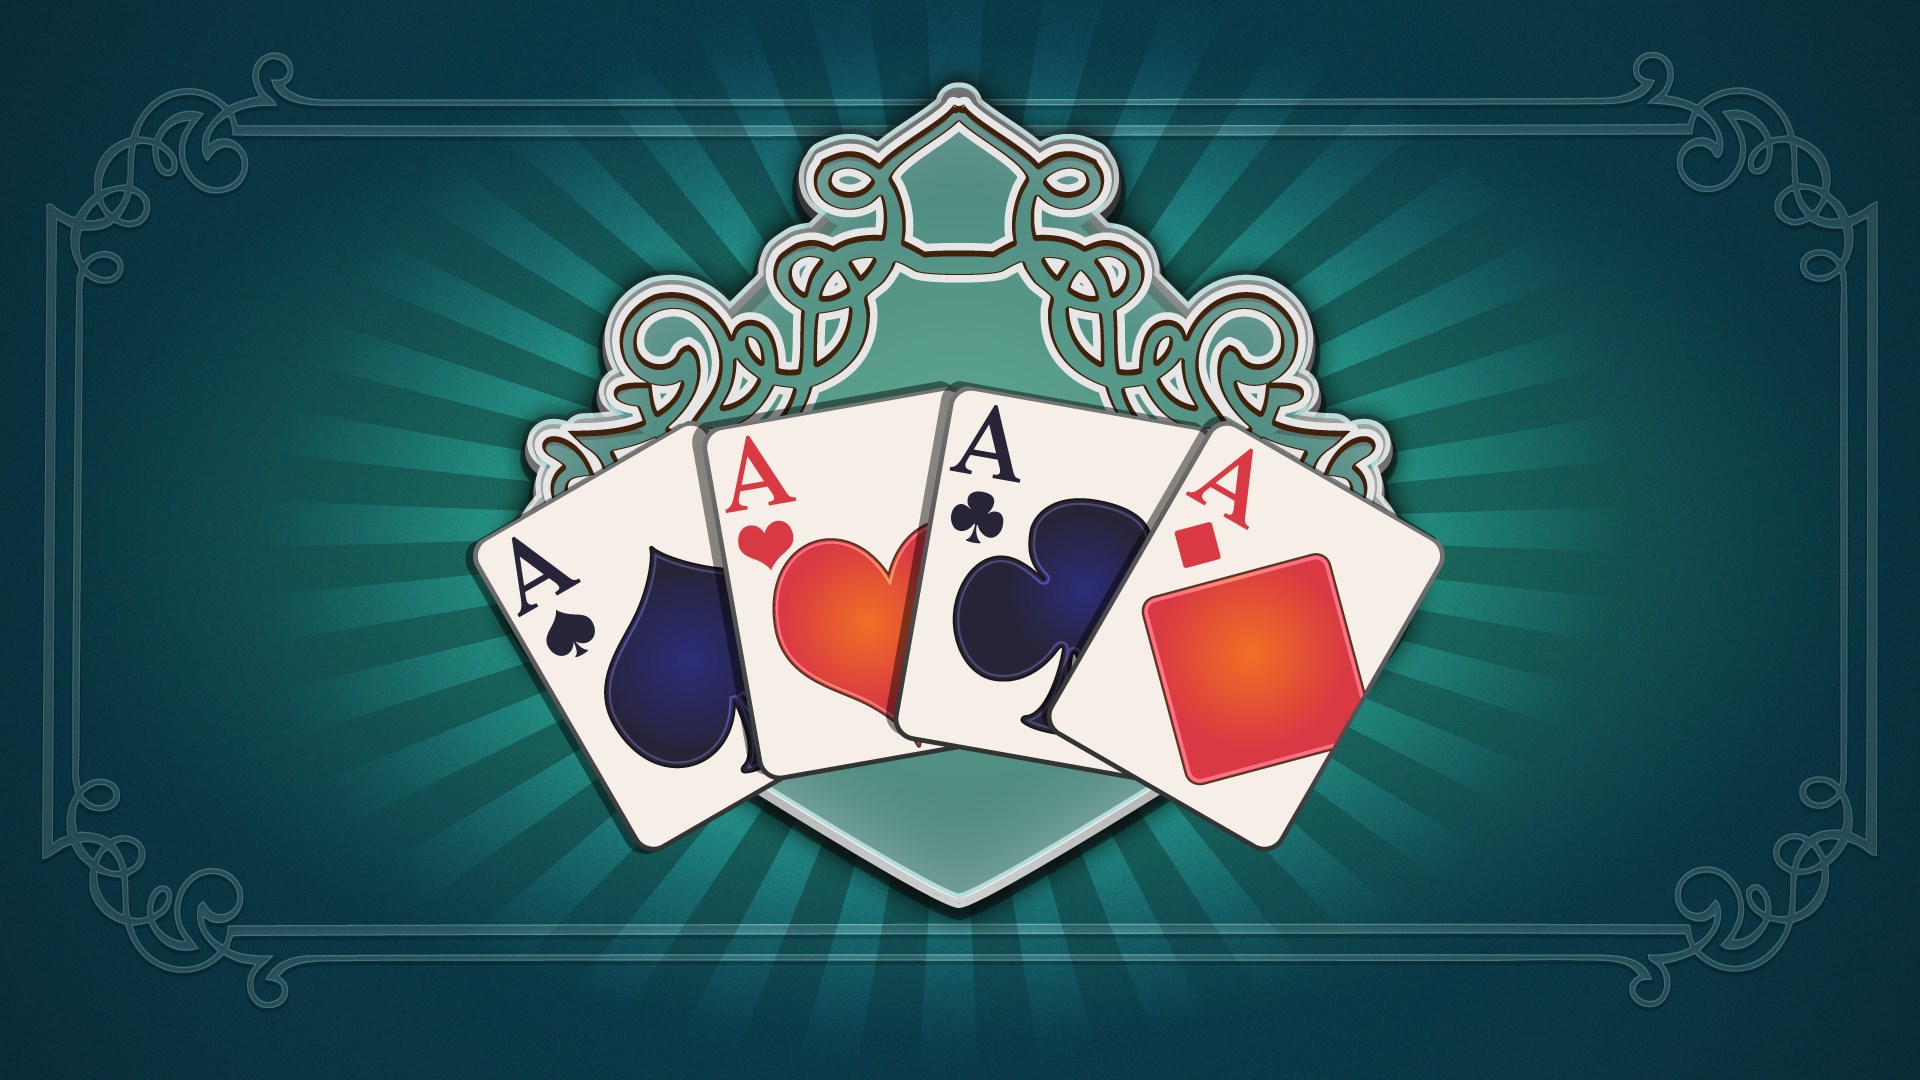 How to play gin rummy with 5 players